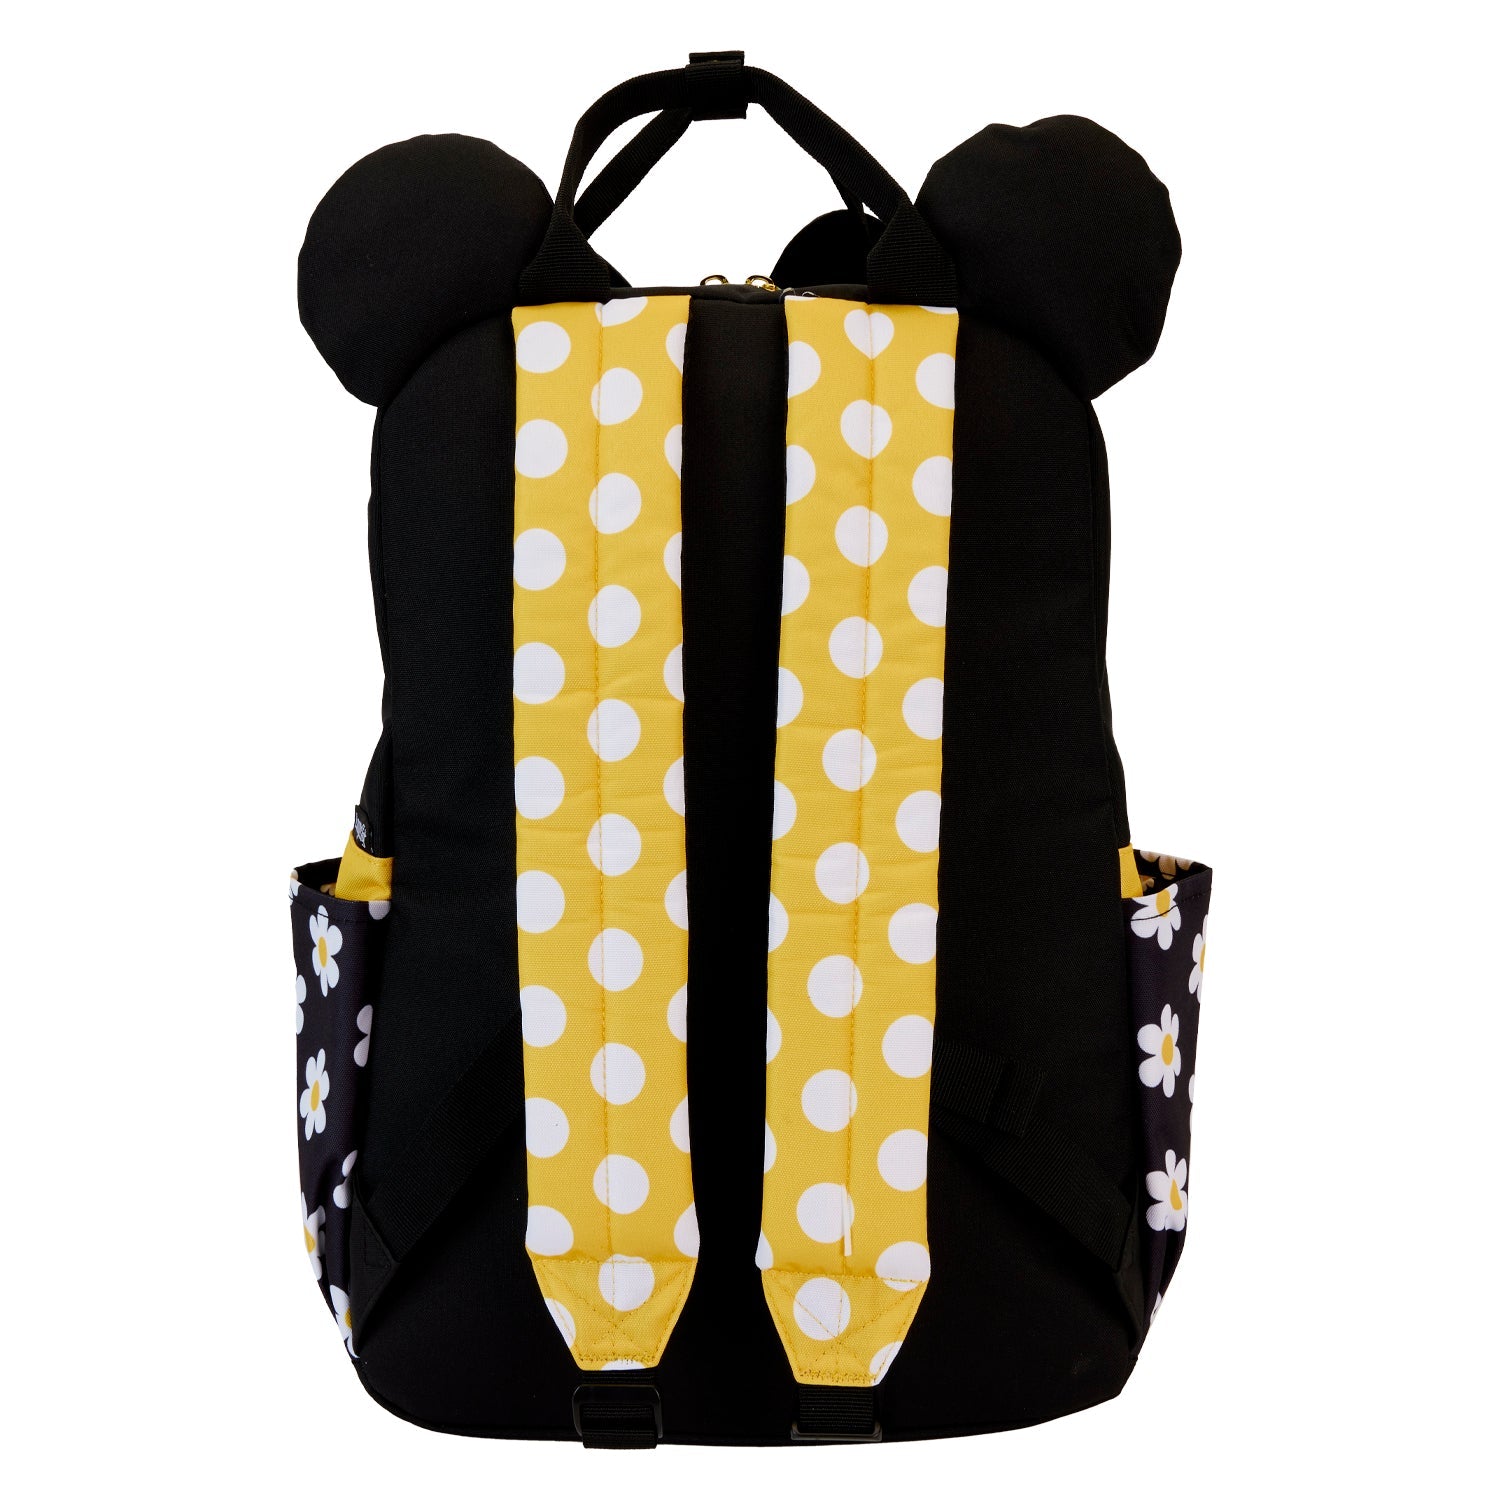 Loungefly x Disney Minnie Mouse Cosplay Nylon Full Size Backpack - GeekCore